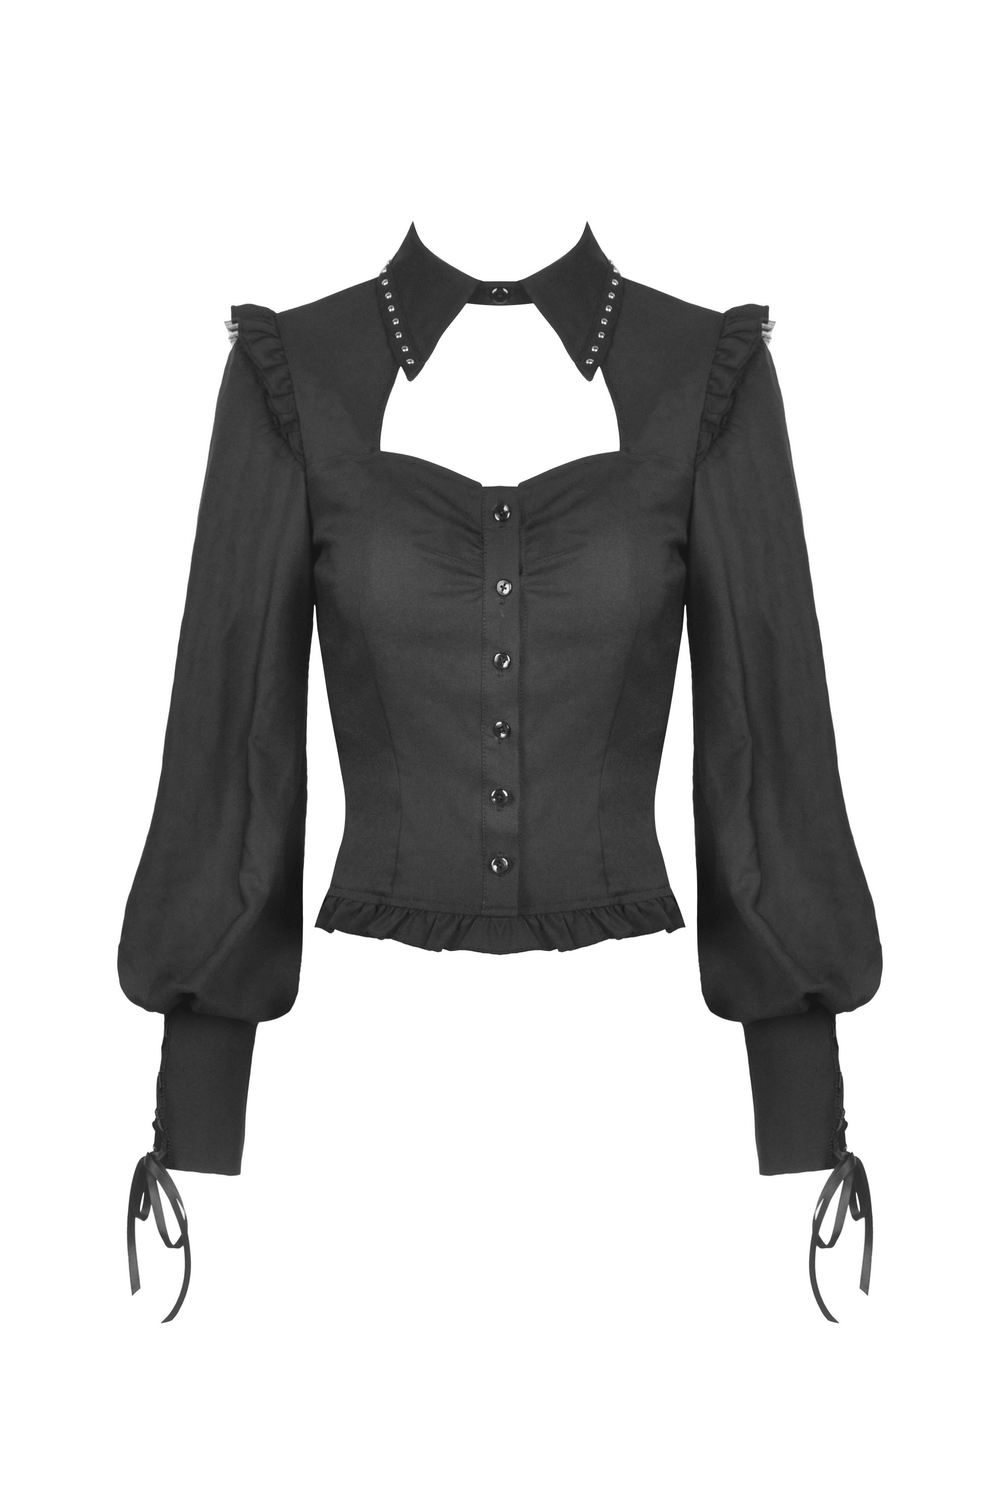 Gothic Black Blouse with Studded Collar and Lace-Up Sleeves